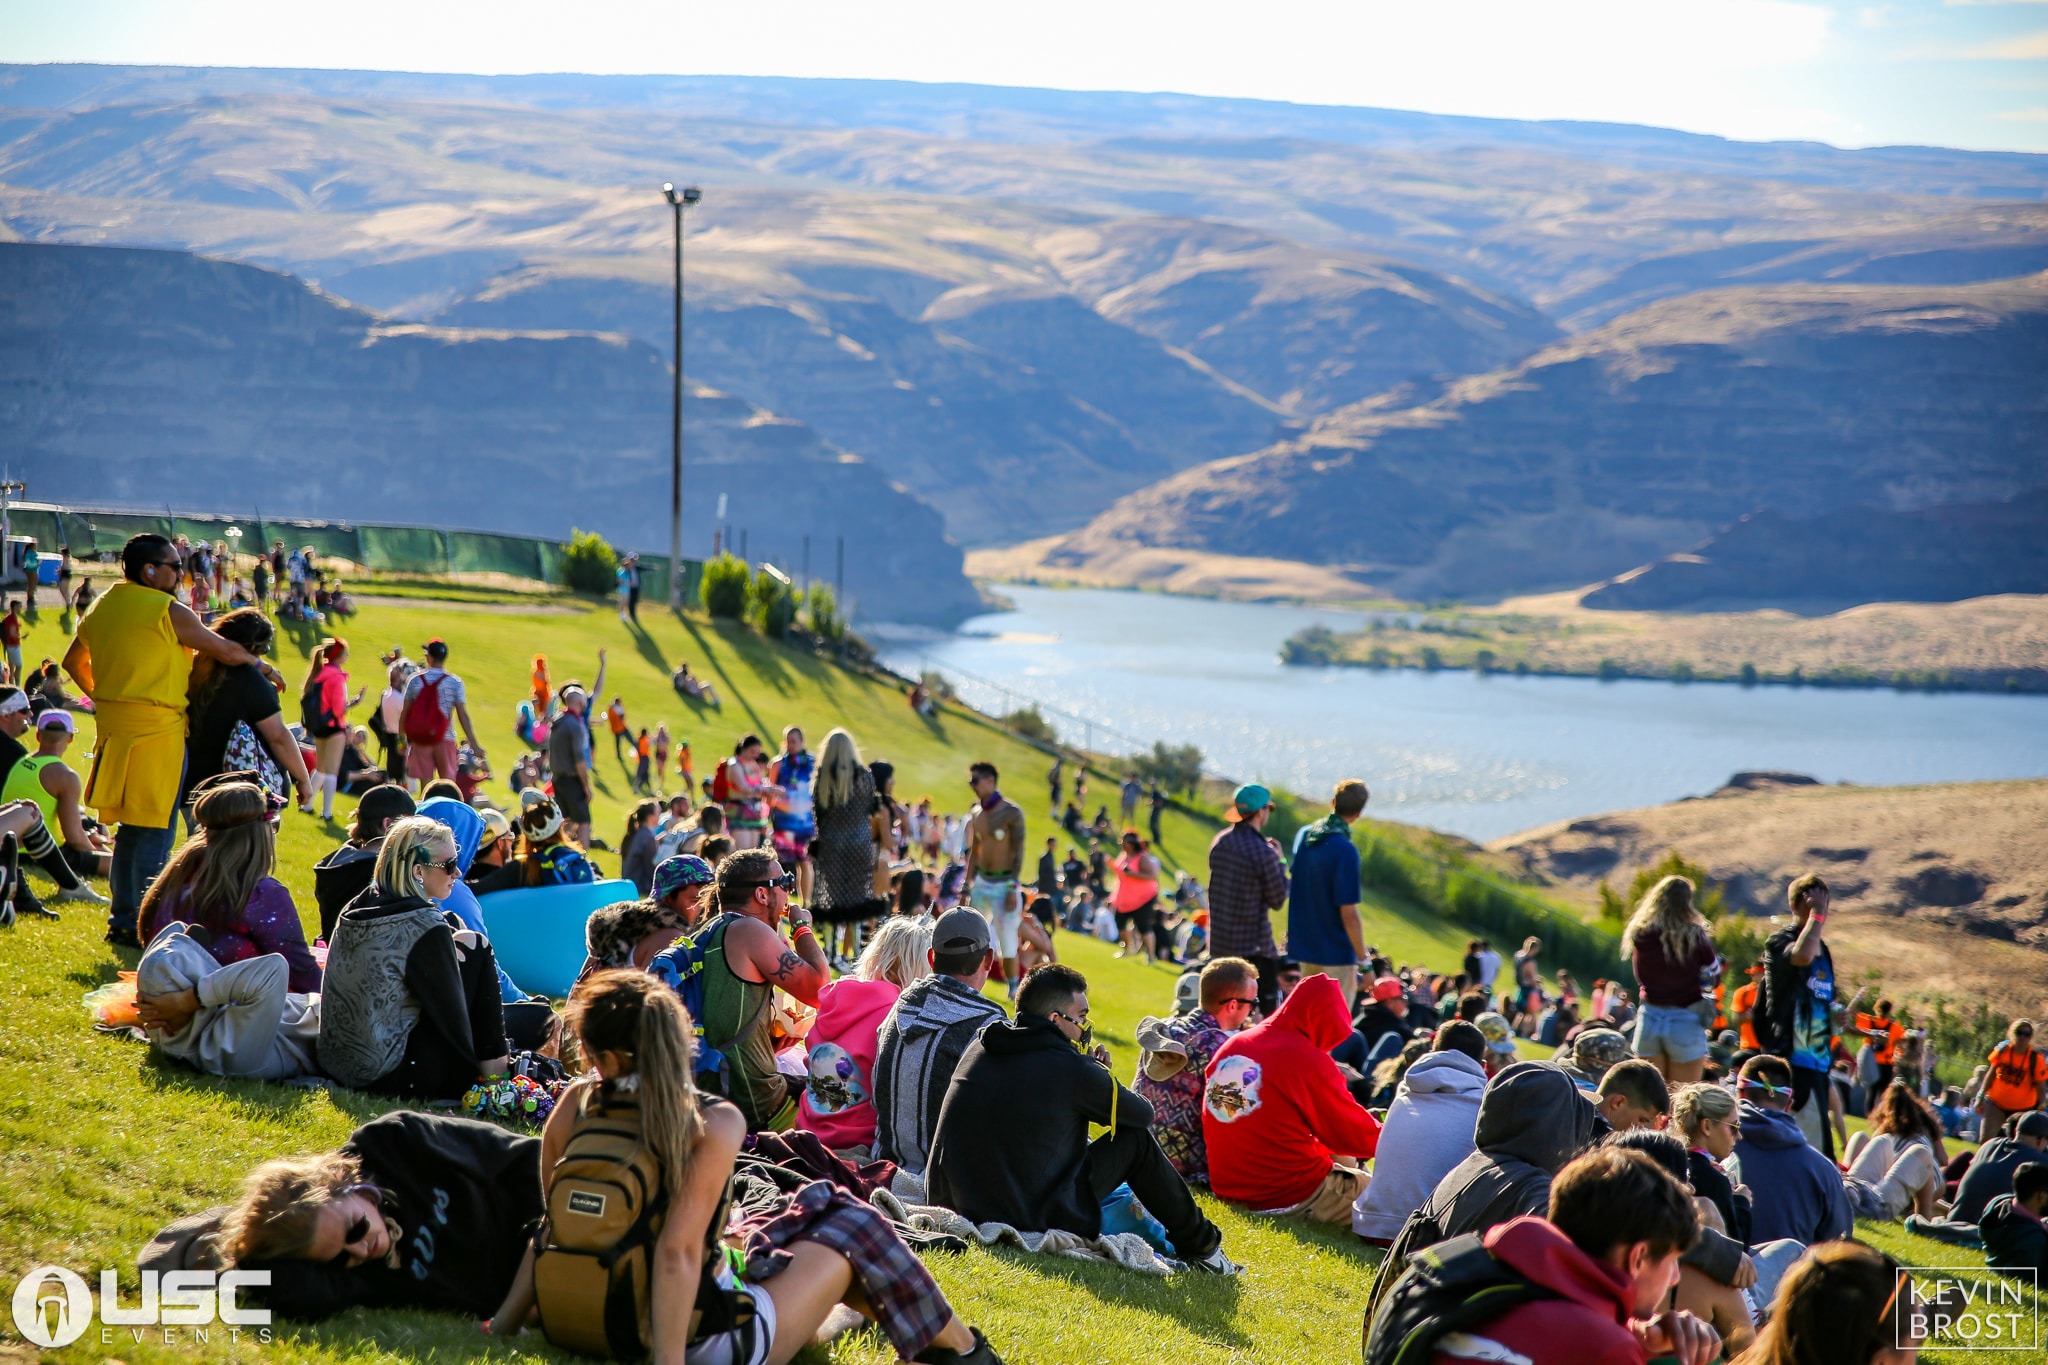 Paradiso camping guide the gorge